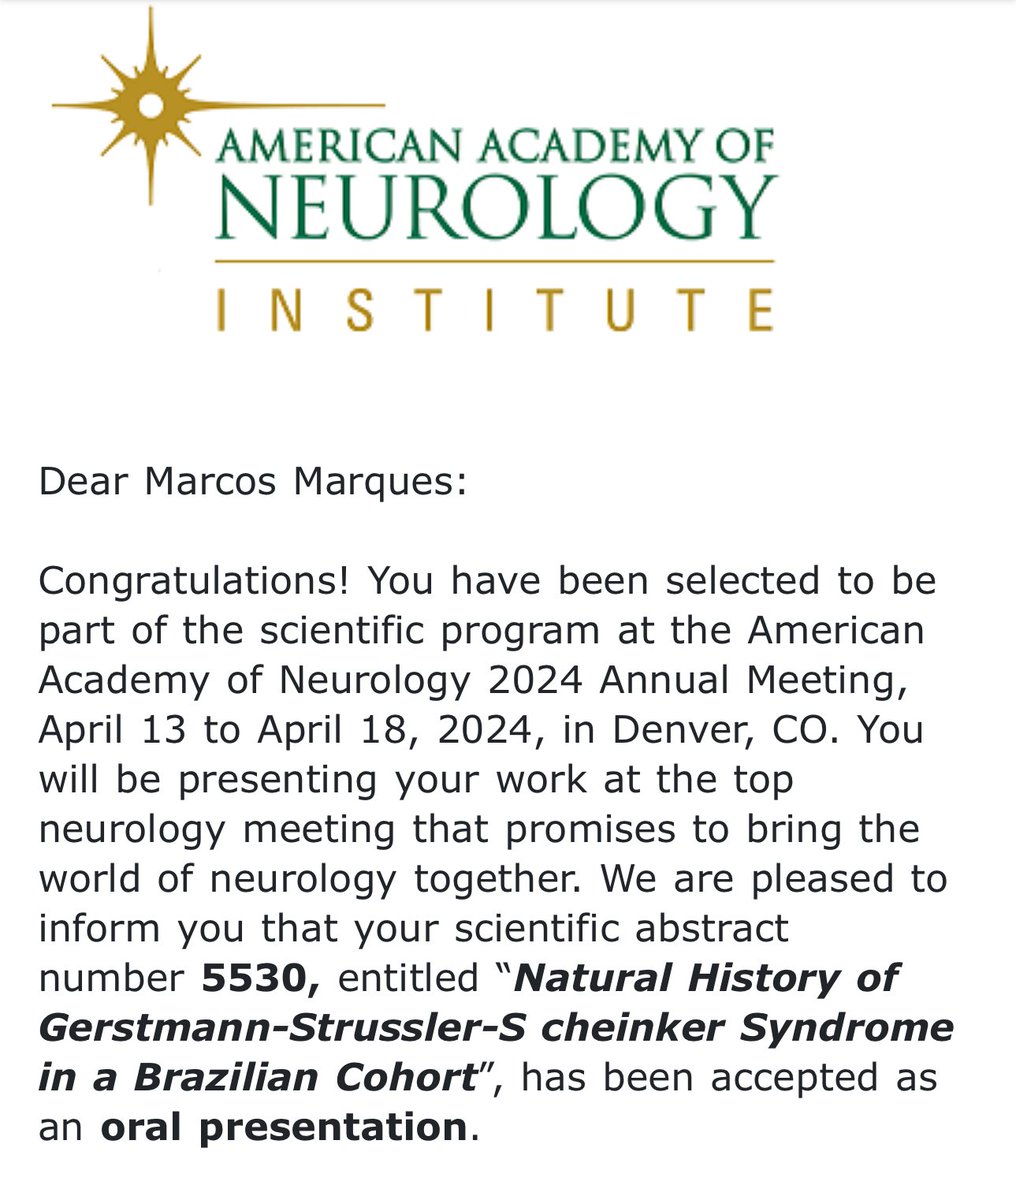 🎉Excited to meet fellow #NeuroTwitter enthusiasts at #AANAM2024! 🧠 

I’ll be presenting preliminary findings from the Brazilian Cohort study on Gerstmann-Sträussler-Scheinker Syndrome. Looking forward to insightful discussions and collaborations!

#rarediseases